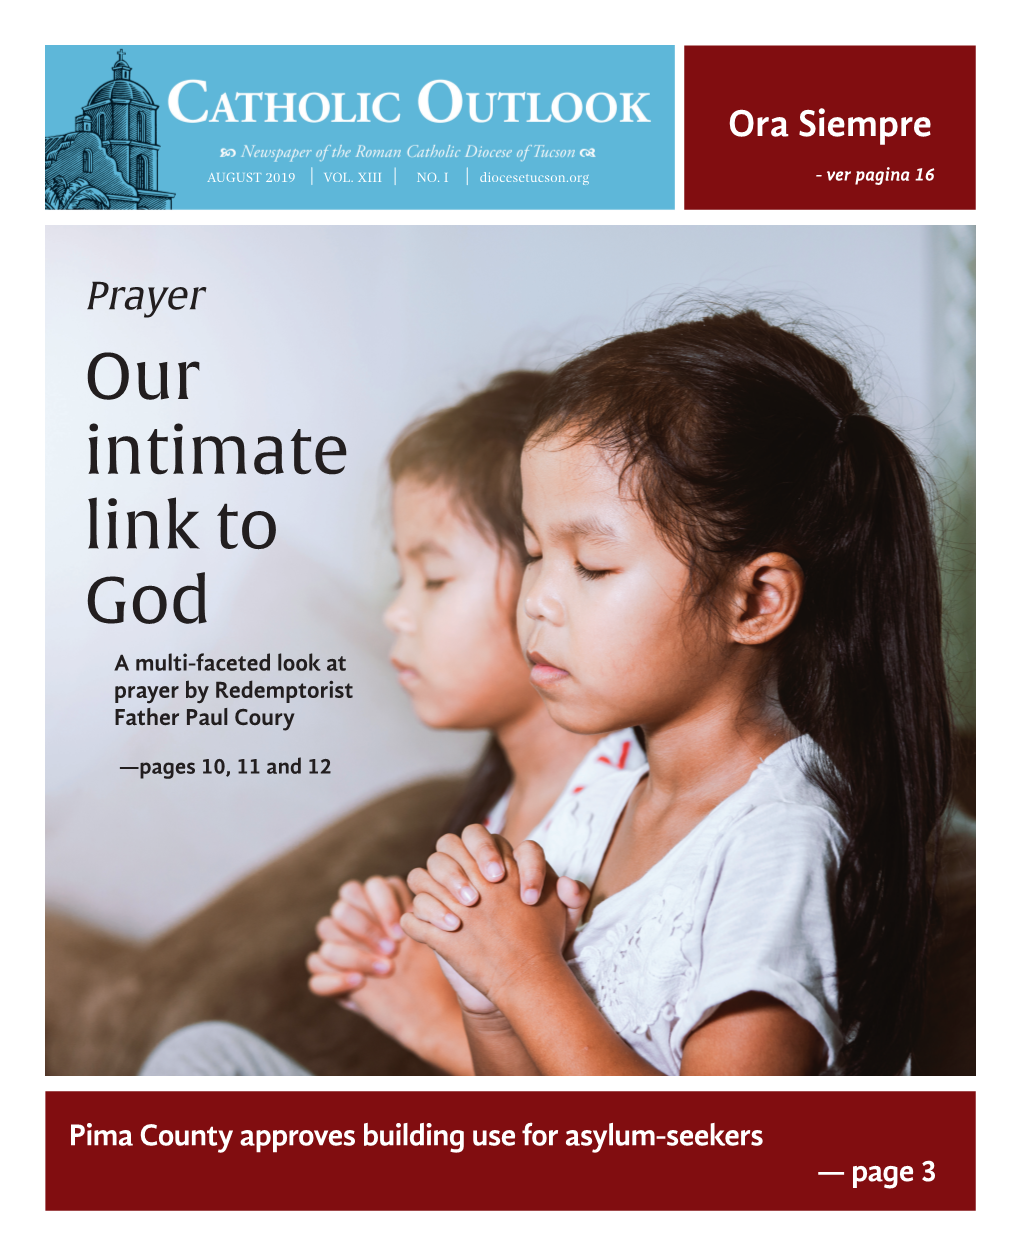 Our Intimate Link to God a Multi-Faceted Look at Prayer by Redemptorist Father Paul Coury